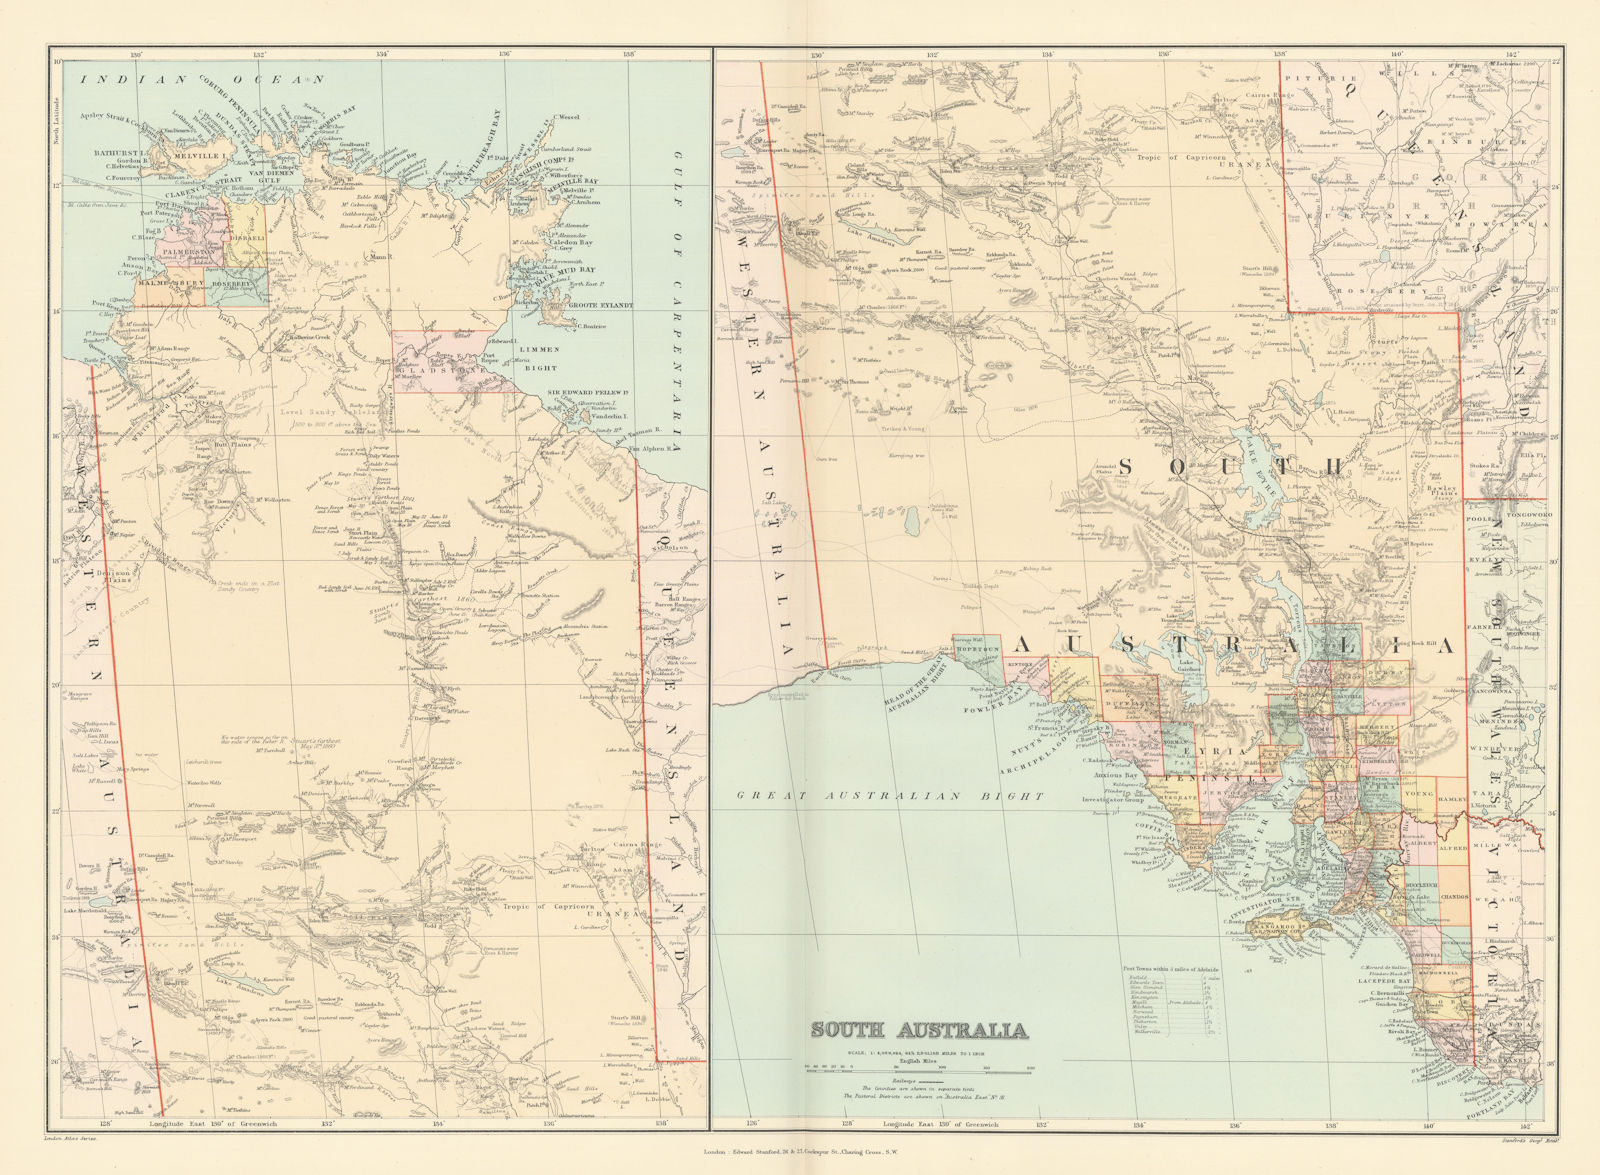 South Australia & Northern Territory. Explorers' routes. Large STANFORD 1896 map